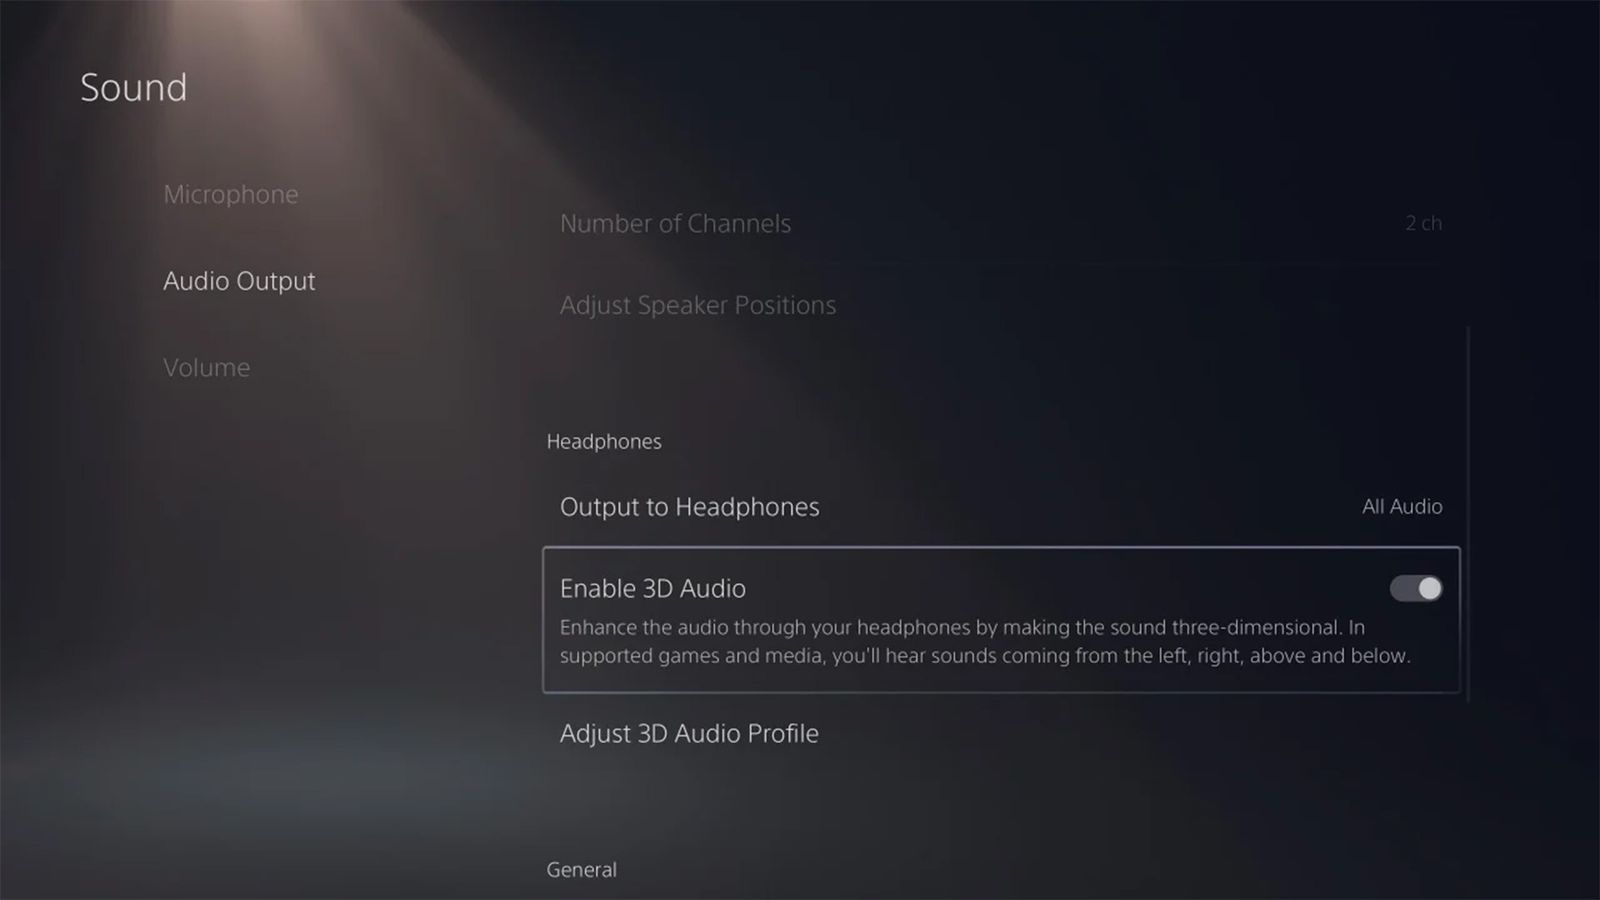 A screenshot of the sound menu for the PS5.